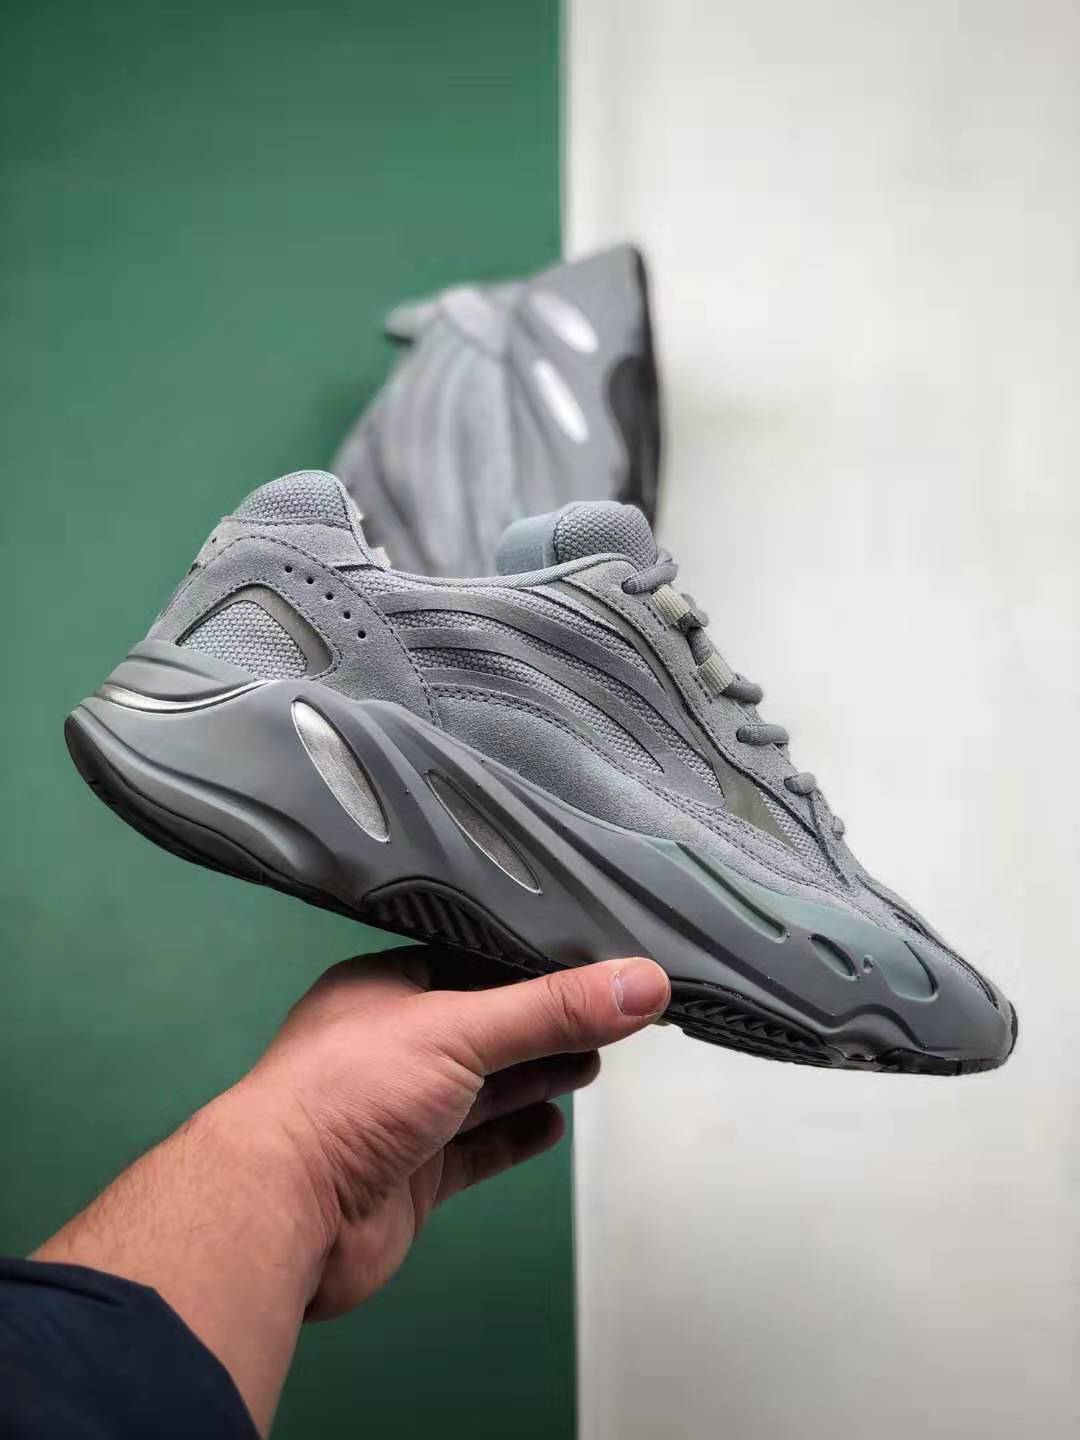 Adidas Yeezy Boost 700 V2 'Hospital Blue' FV8424 - Shop Now for Ultimate Style & Comfort!